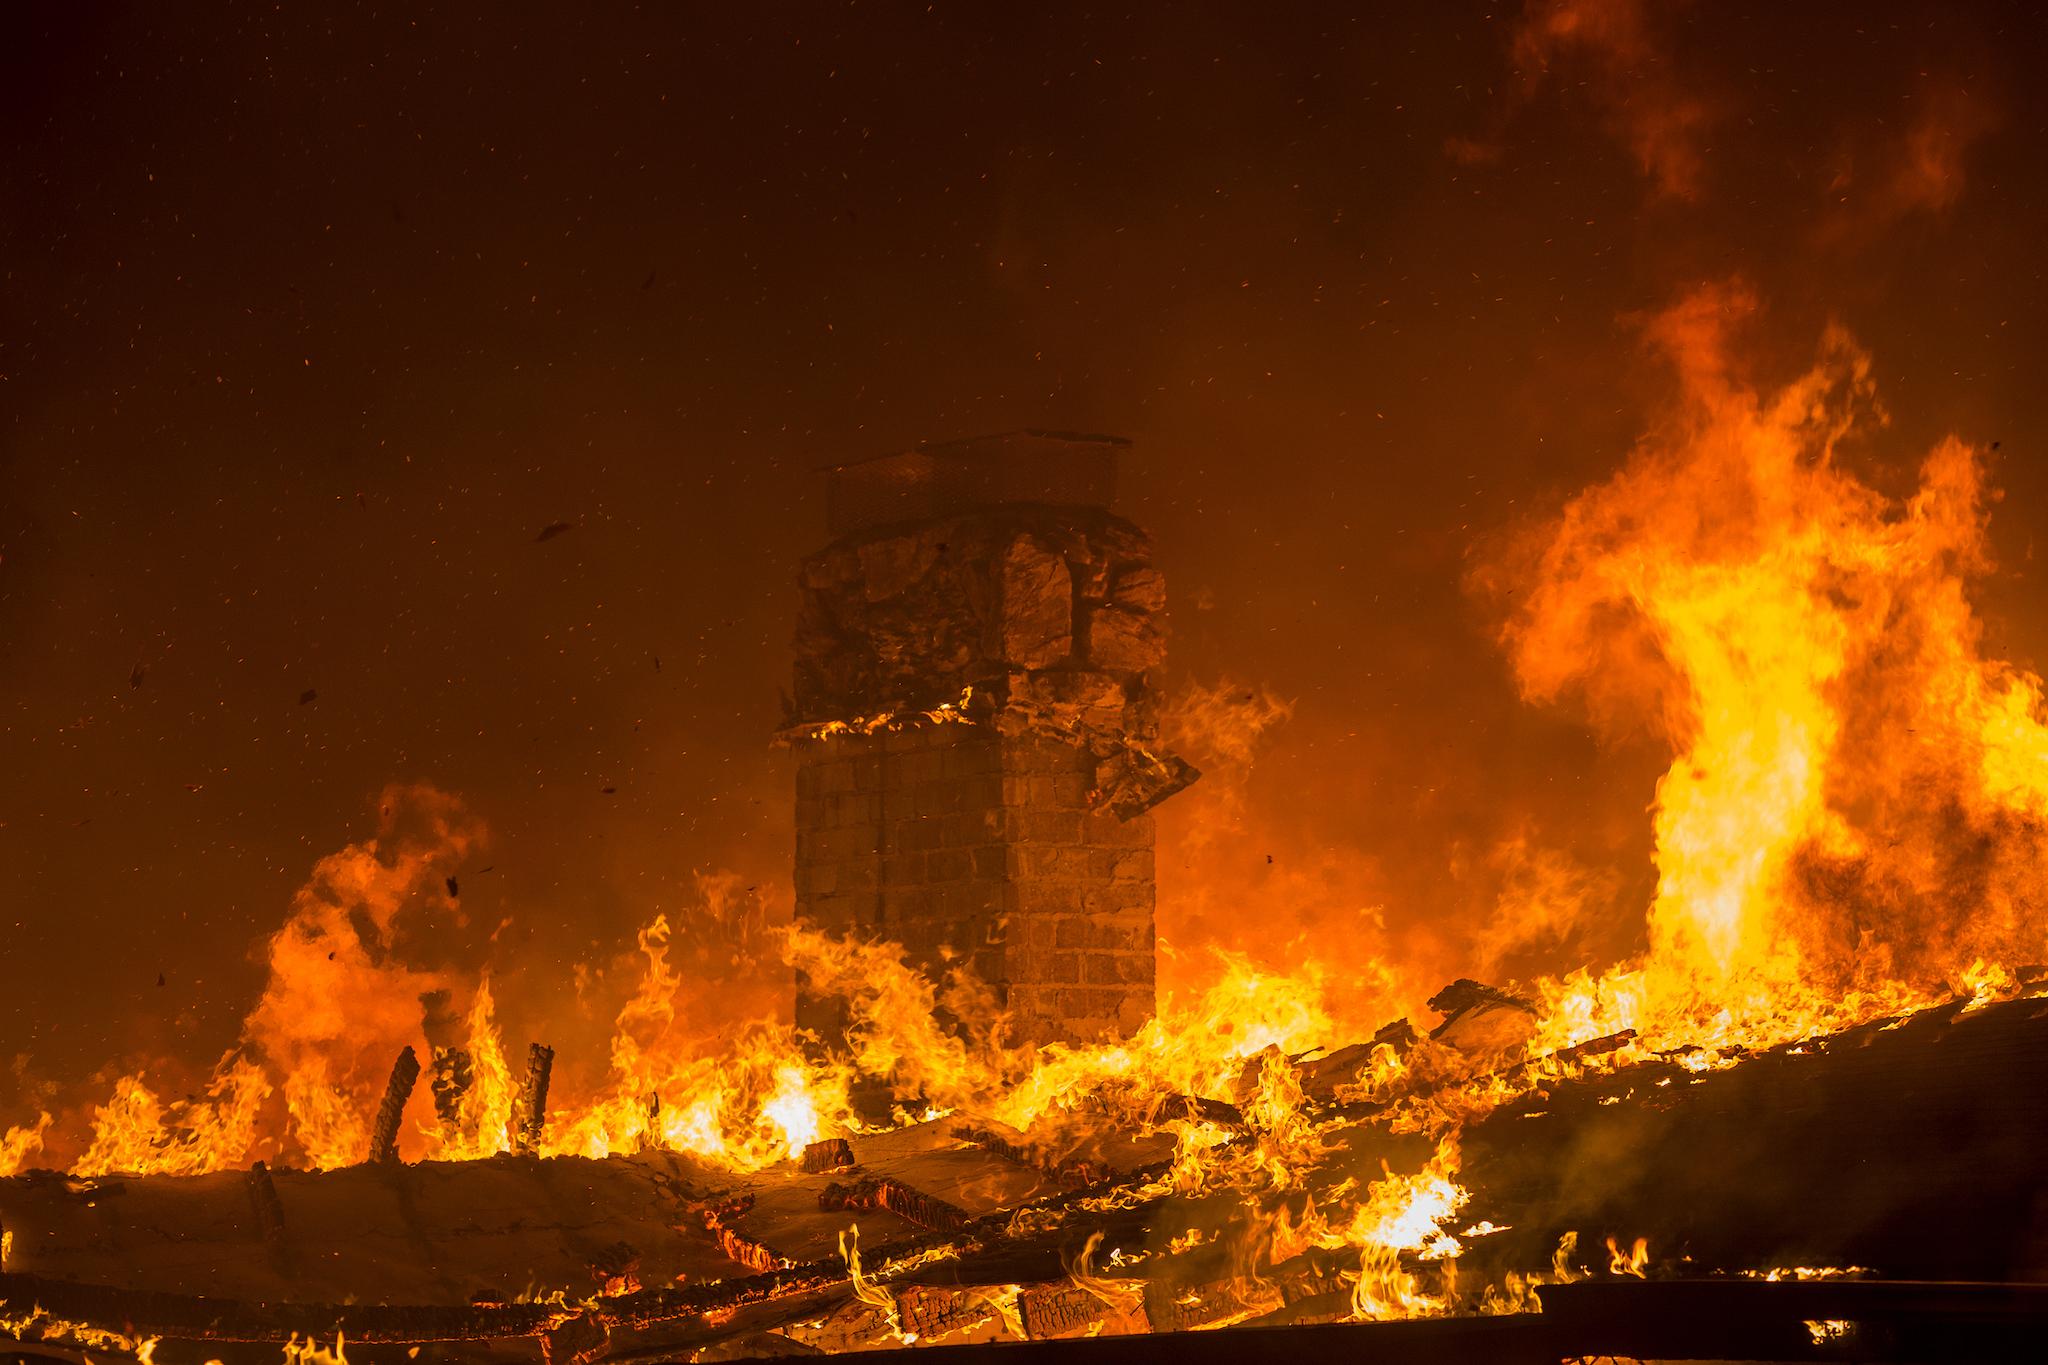 A house burns during the Woolsey Fire on November 9, 2018 in Malibu, California